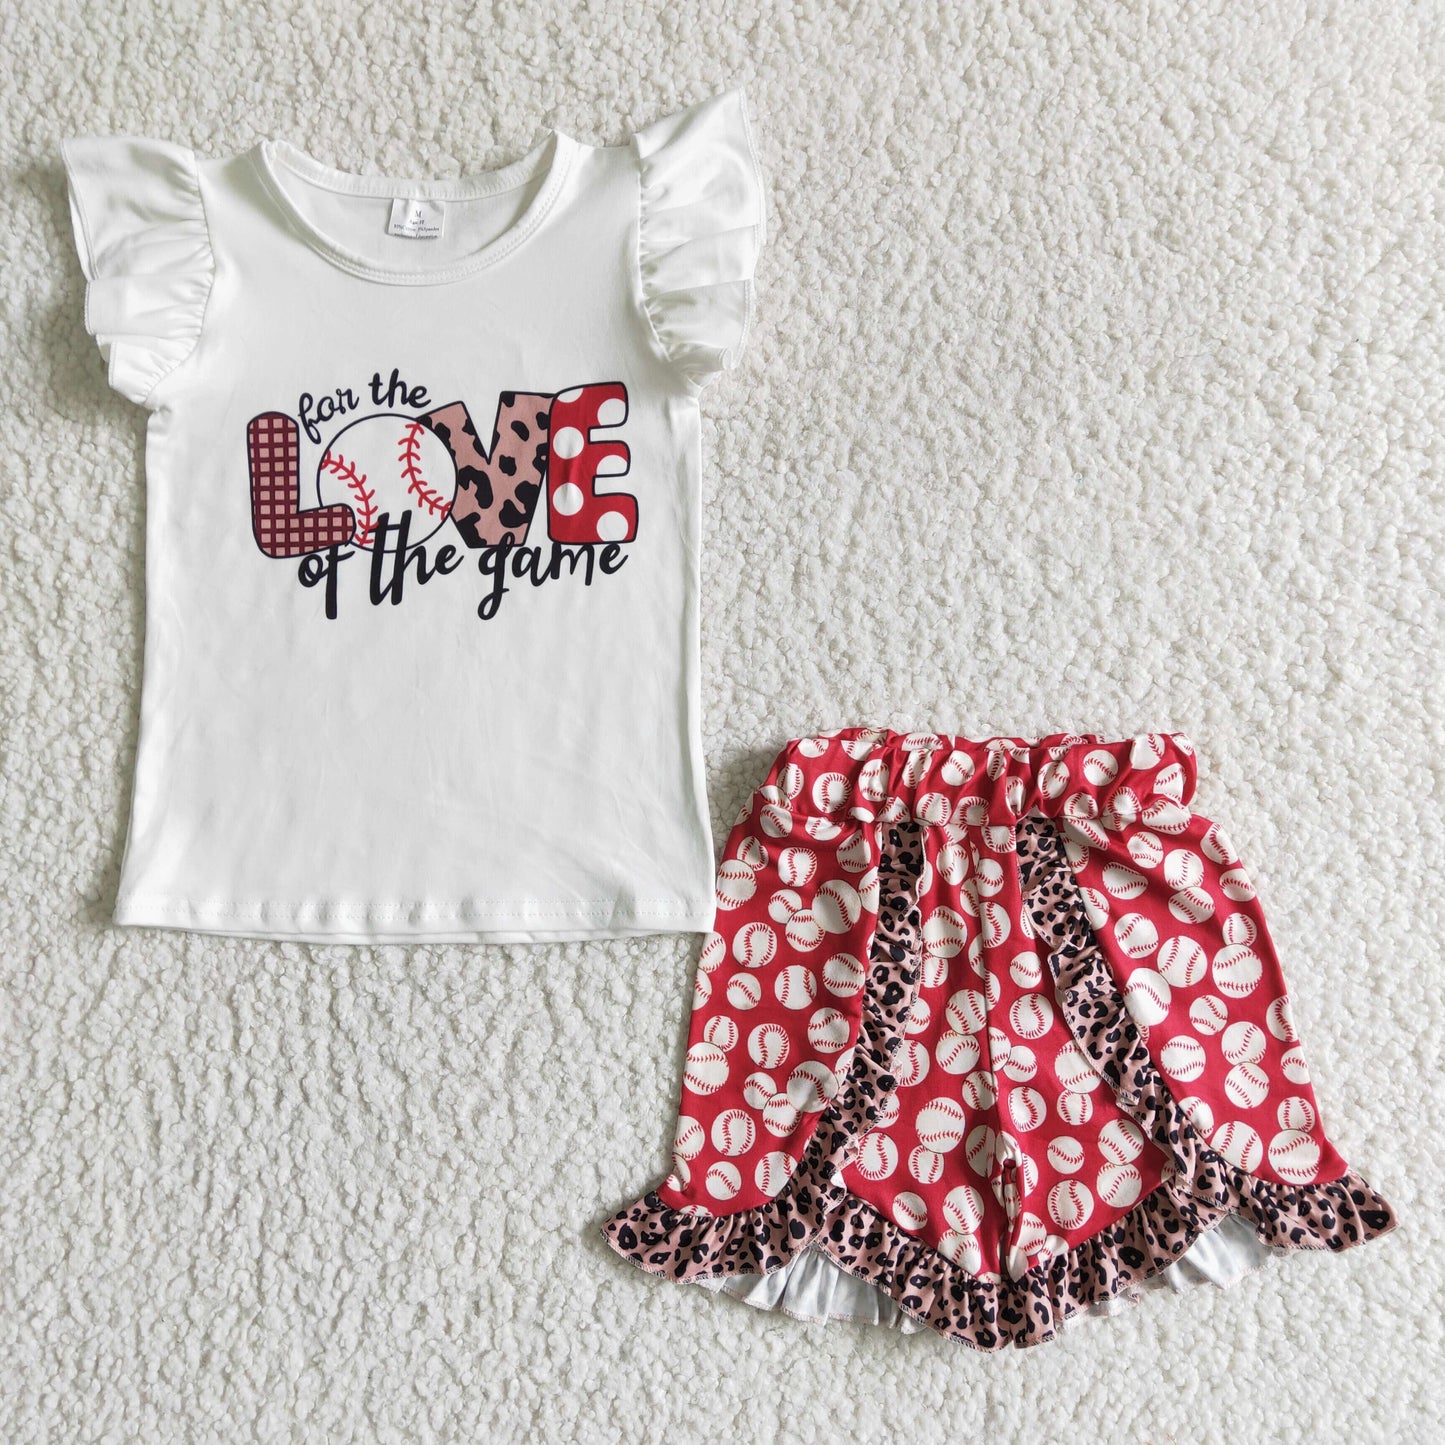 Love of the game shirit baseball shorts girls boutique outfits